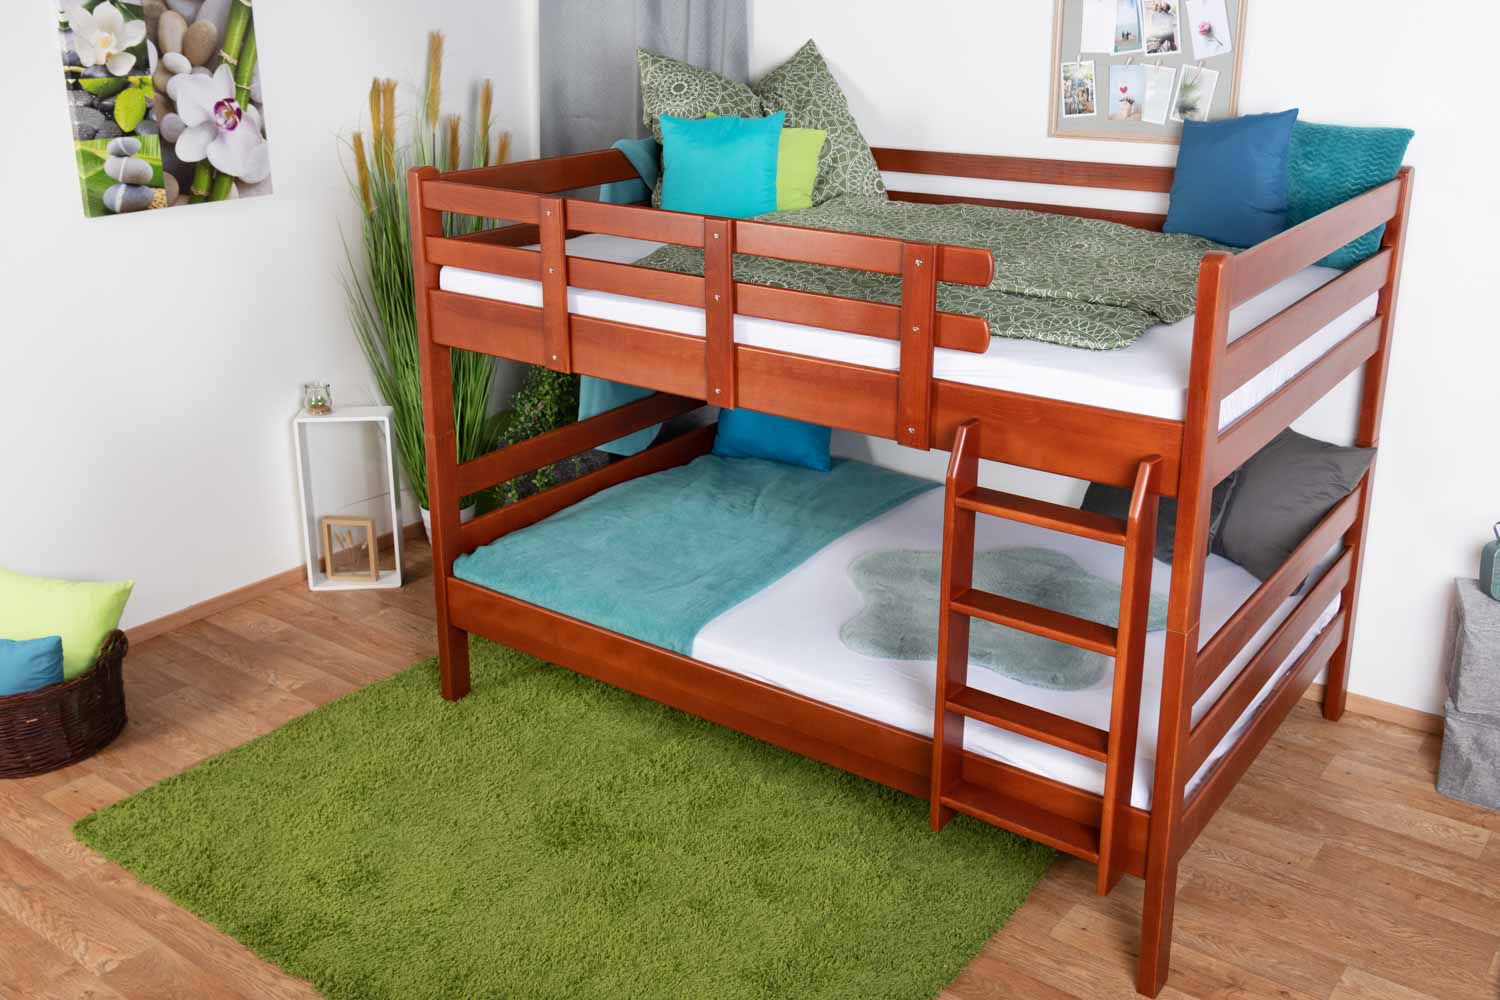 Bunk bed 140 x 200 cm "Easy Premium Line" K24/n, head and footboard straight, solid beech wood, cherry lacquered, convertible